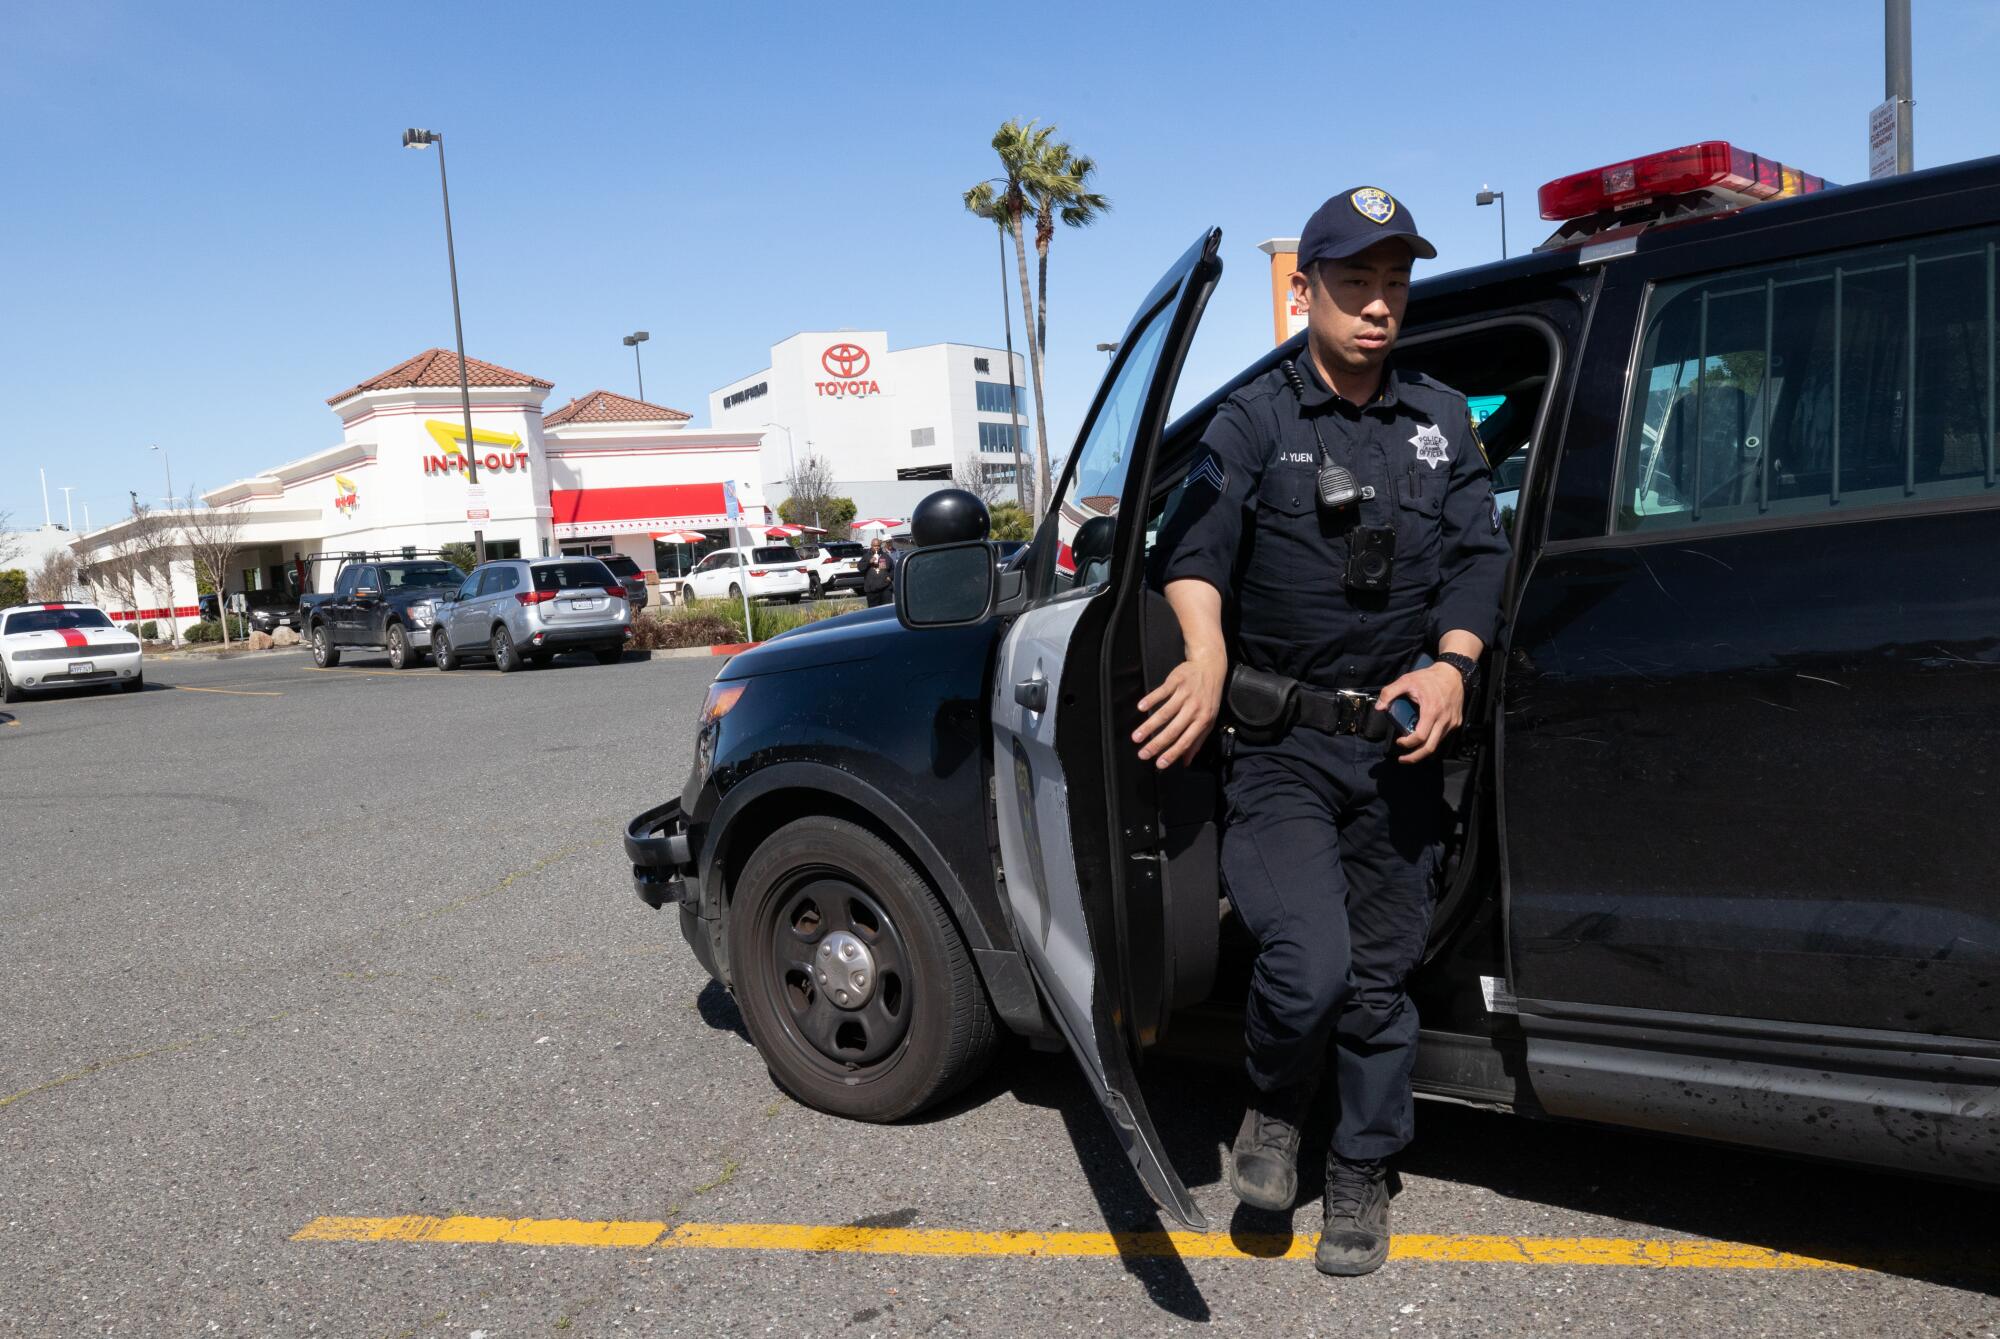 A police officer exits his parked car at an In-N-Out Burger parking lot.